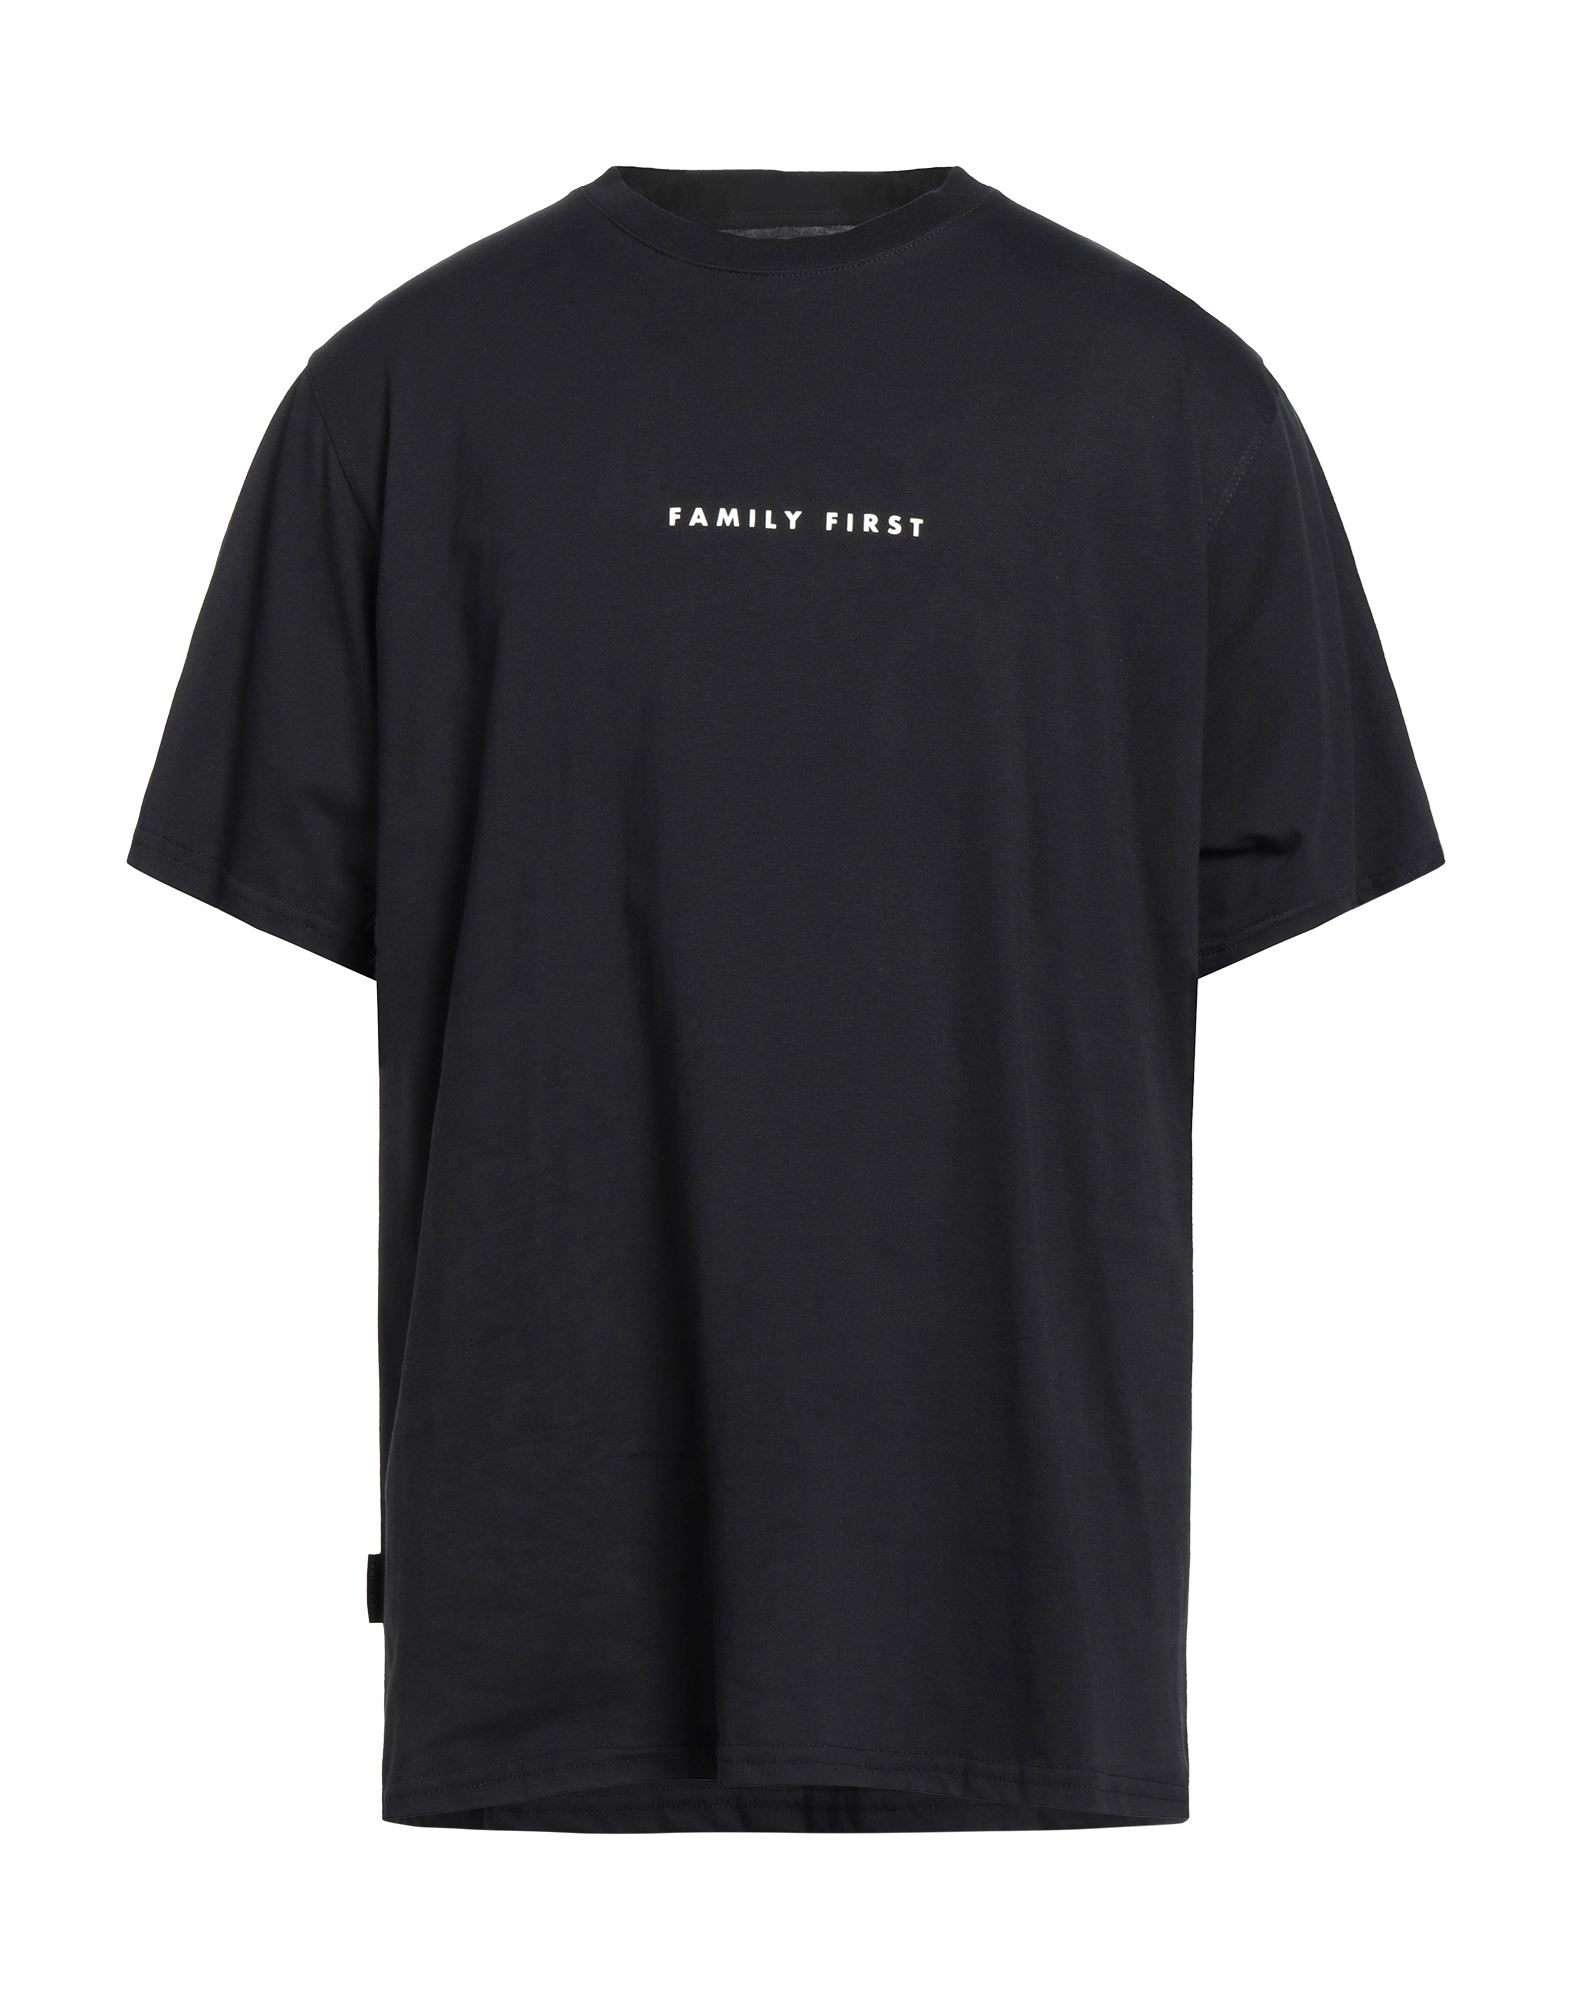 FAMILY FIRST MILANO FAMILY FIRST MILANO MAN T-SHIRT BLACK SIZE S COTTON